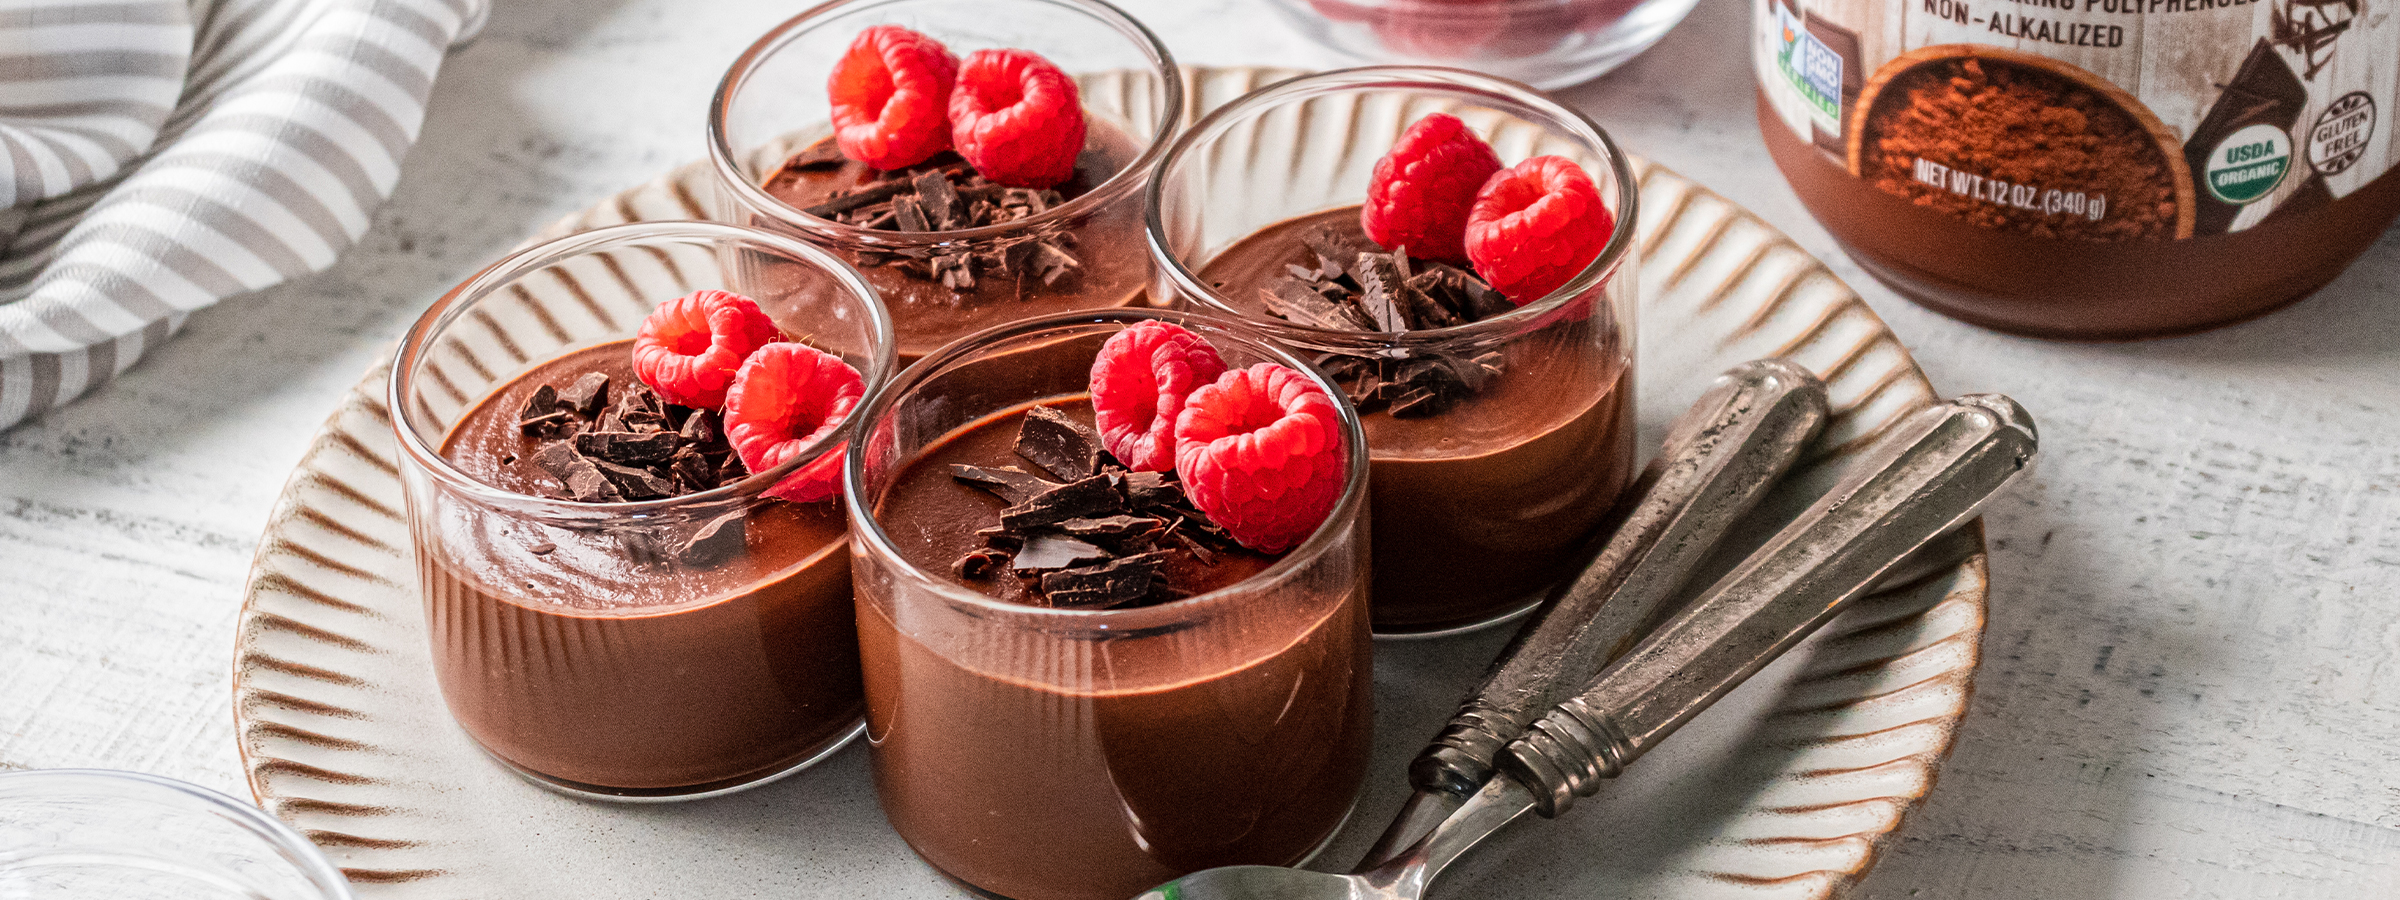 top view of 4 glasses of Vegan Double Chocolate Panna Cotta